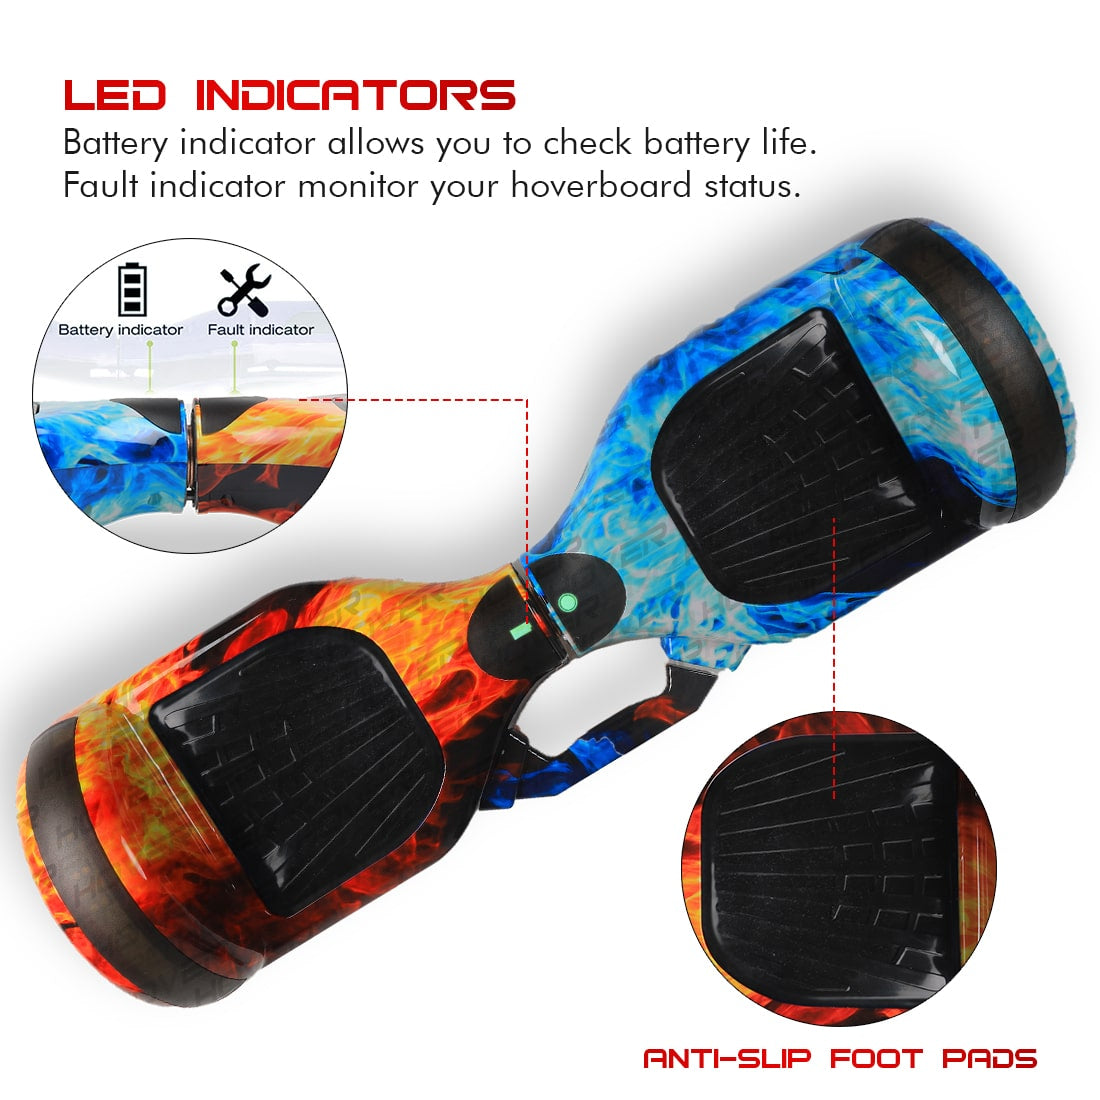 sams toy world H6+ New Hoverboard with Remote, Bag and Long Range Battery - samstoy.in